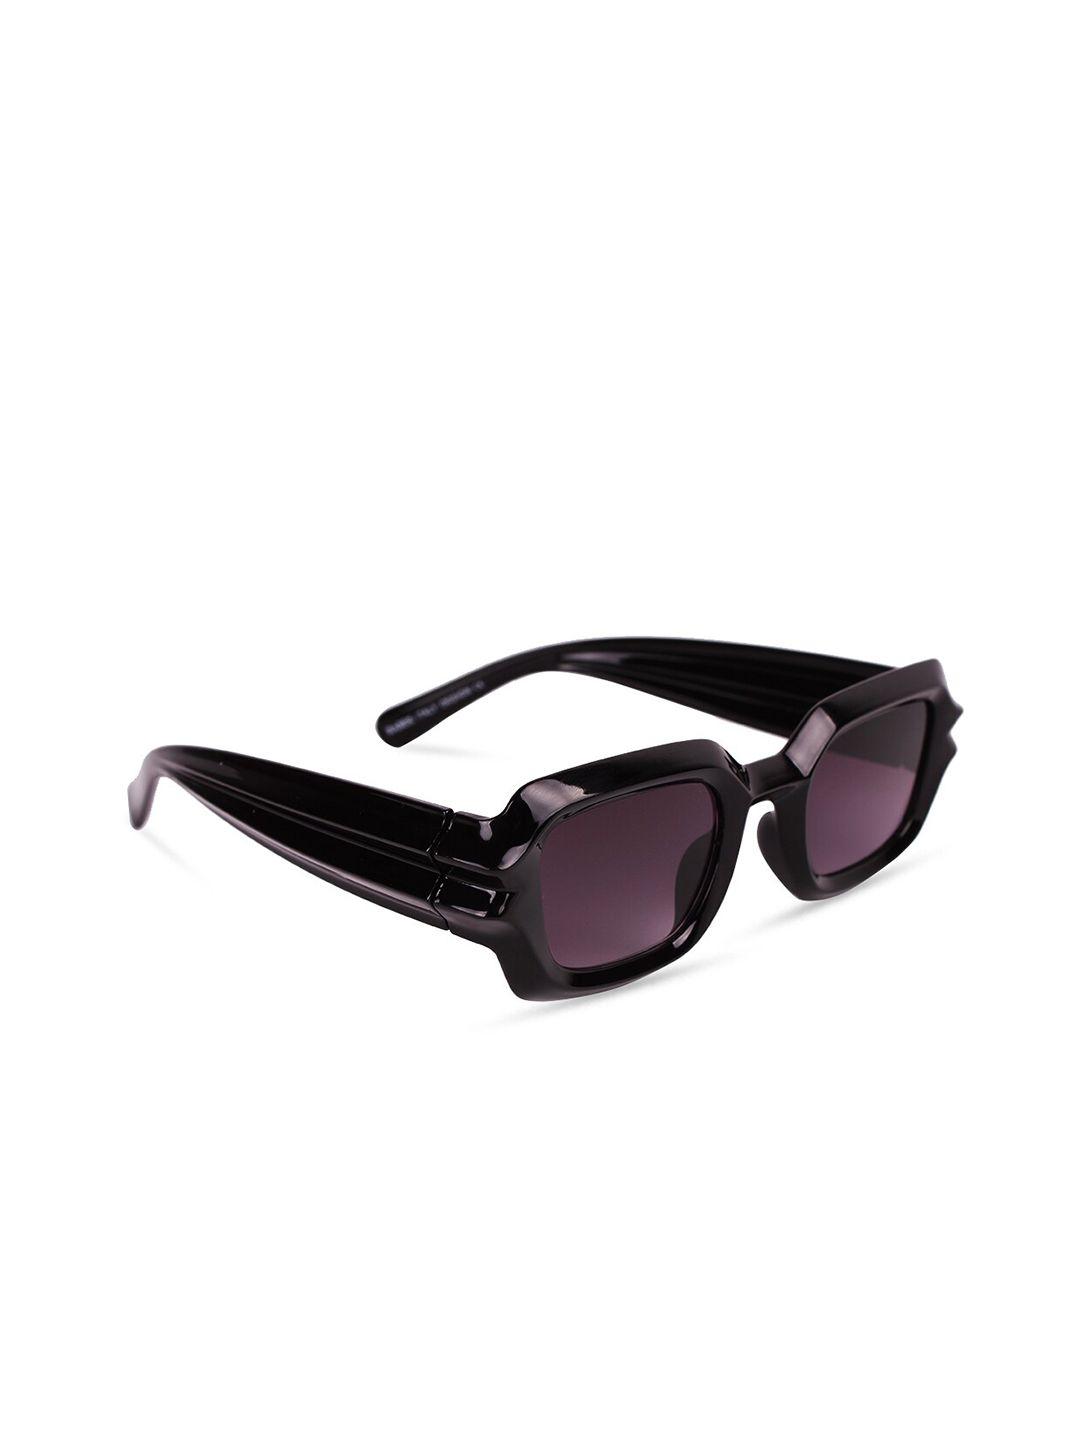 quirky unisex oval uv protected lens sunglasses